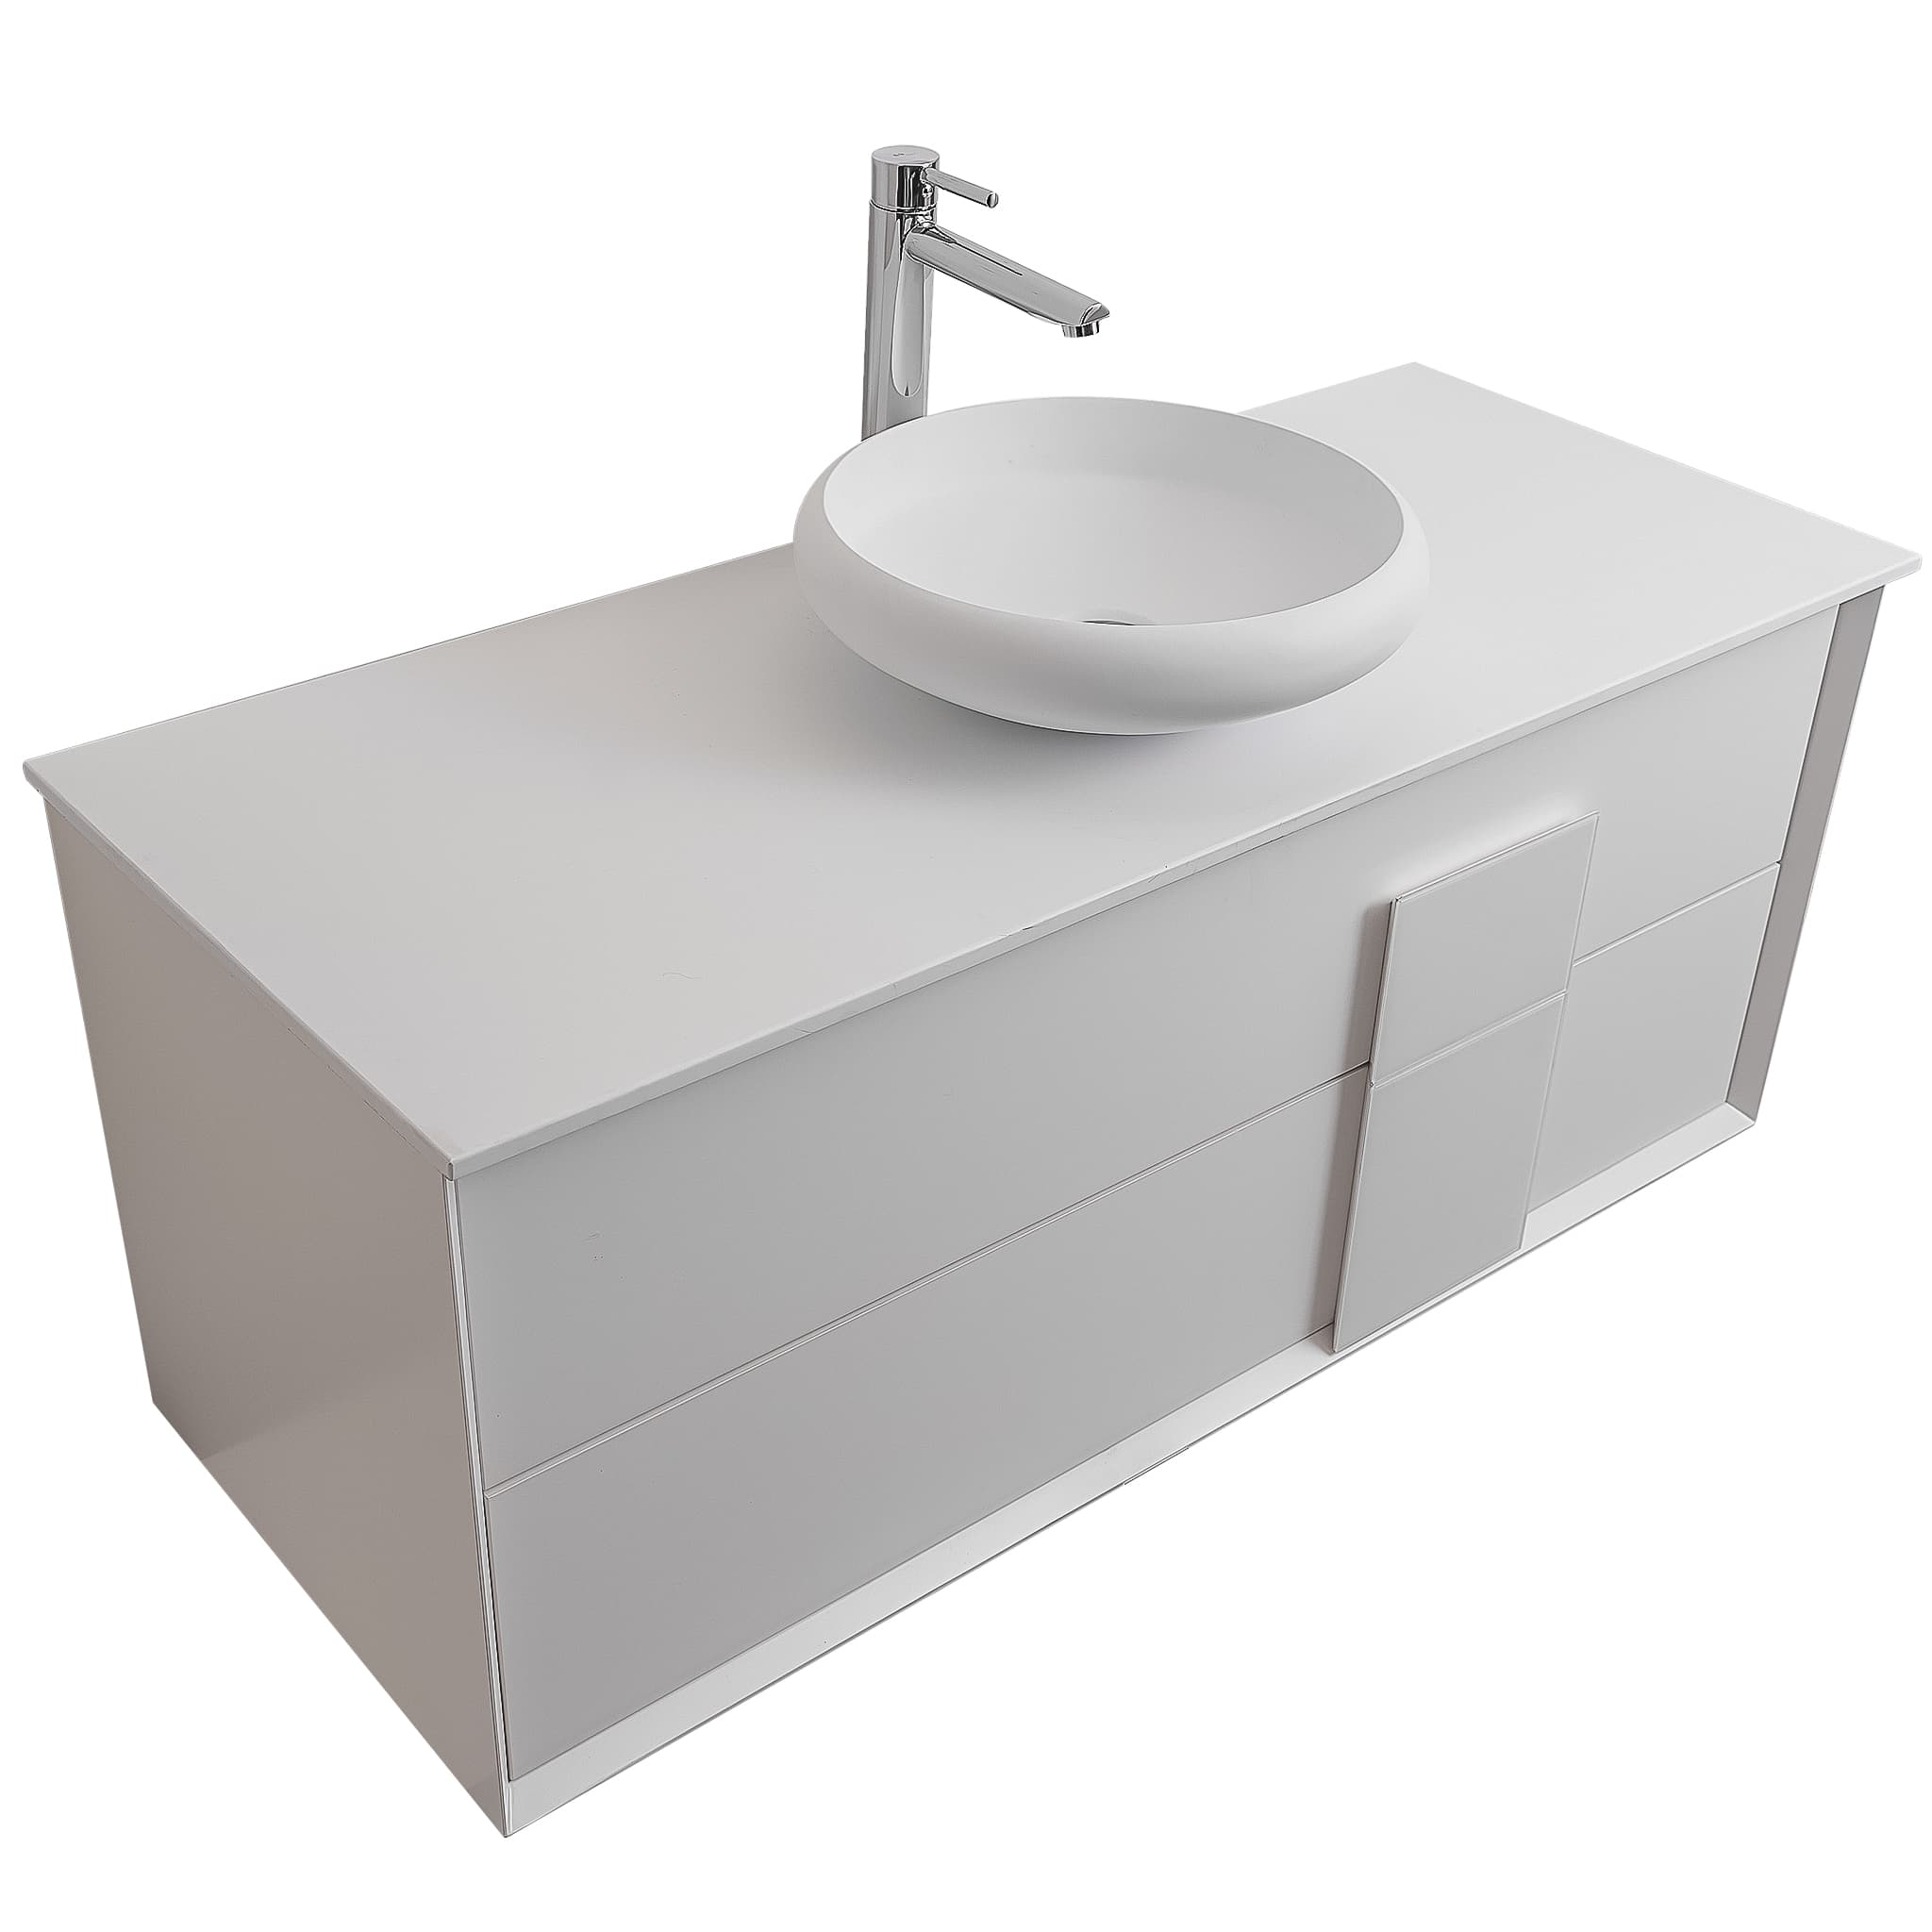 Piazza 47.5 Matte White With White Handle Cabinet, Solid Surface Flat White Counter and Round Solid Surface White Basin 1153, Wall Mounted Modern Vanity Set